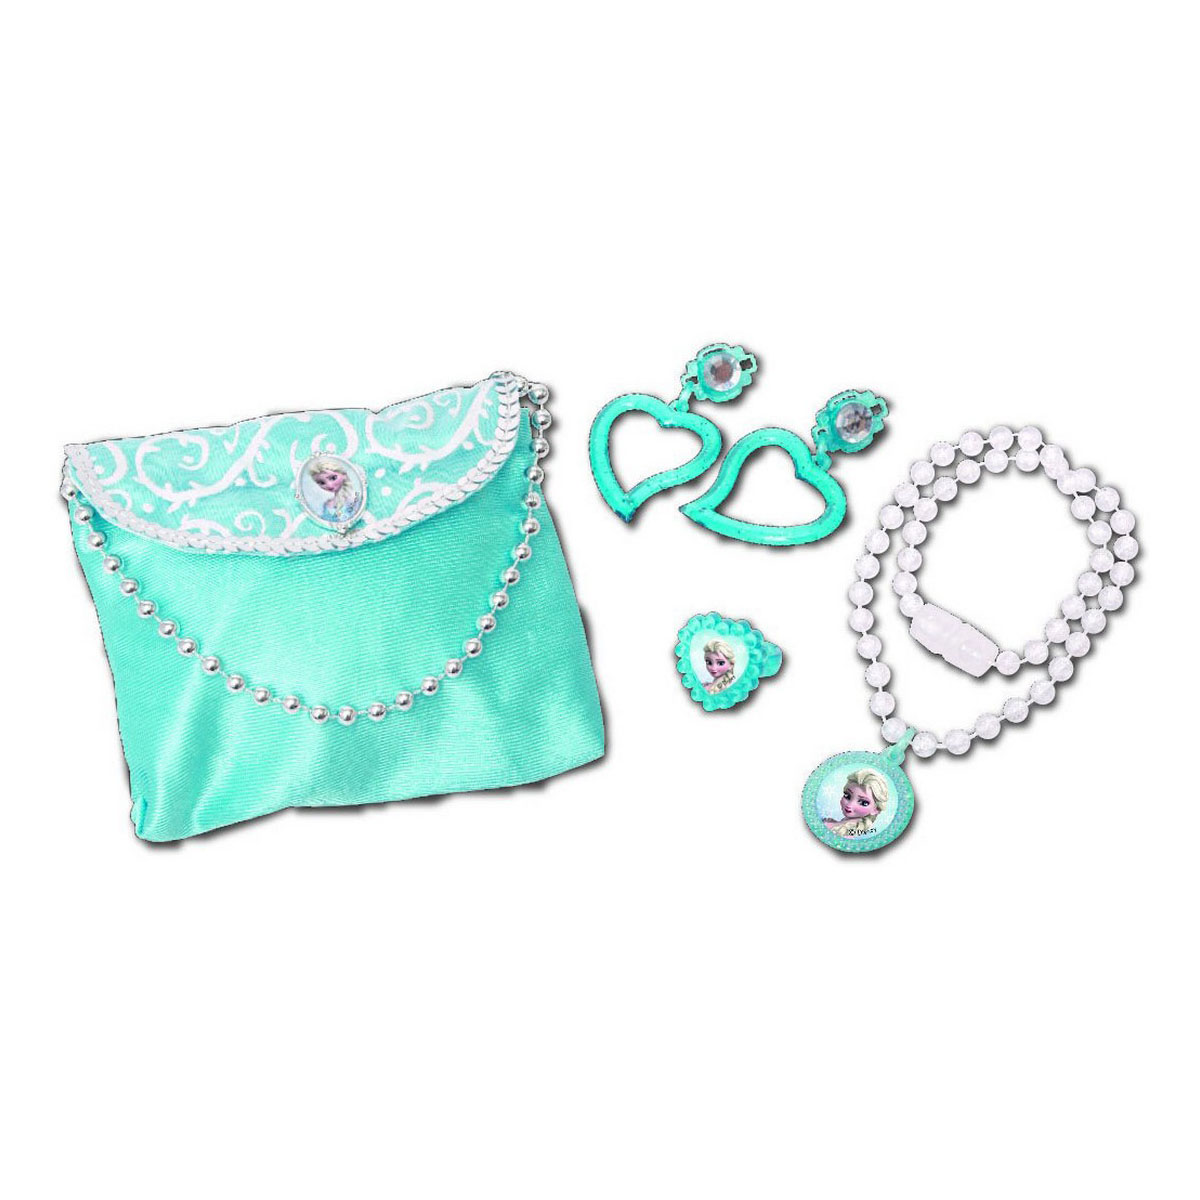 Disney Frozen Bag with Accessories for Girls